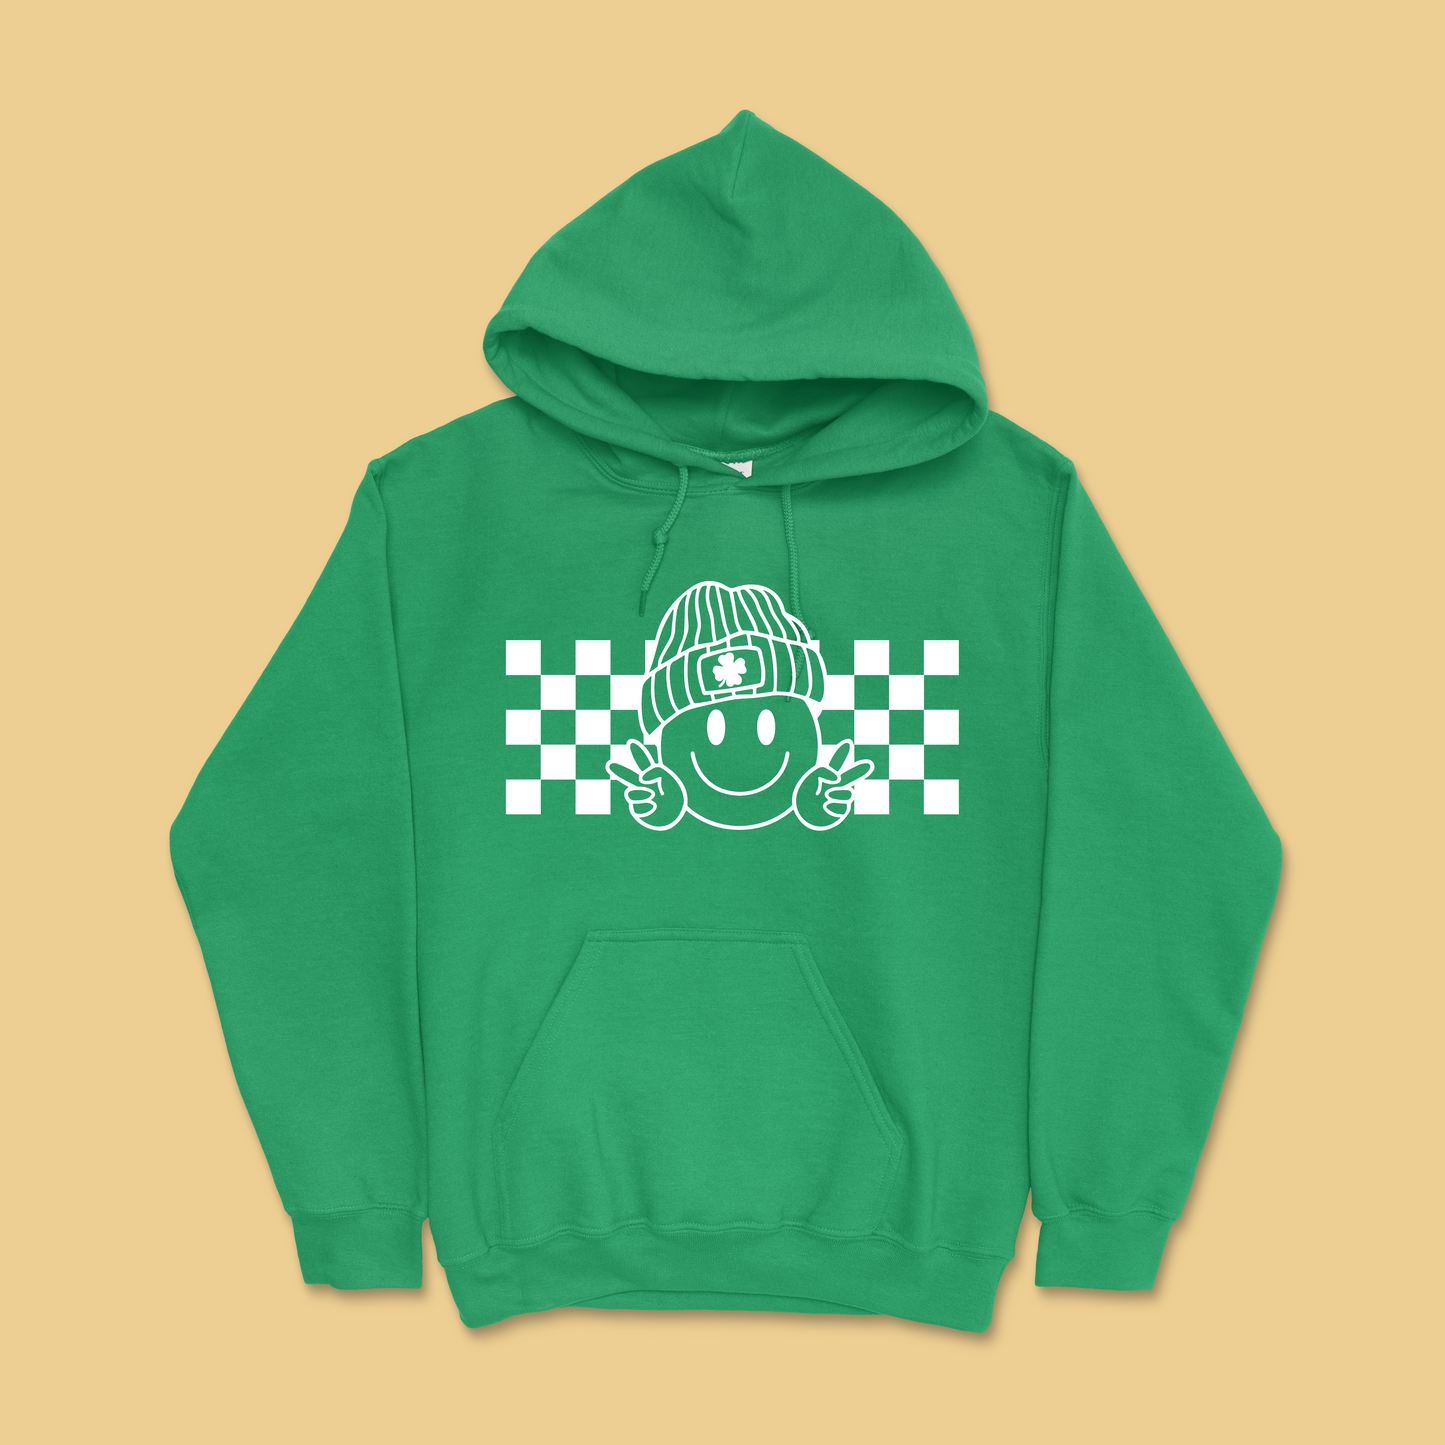 CHECKERED BEANIE YOUTH SWEATER <br> More colors available